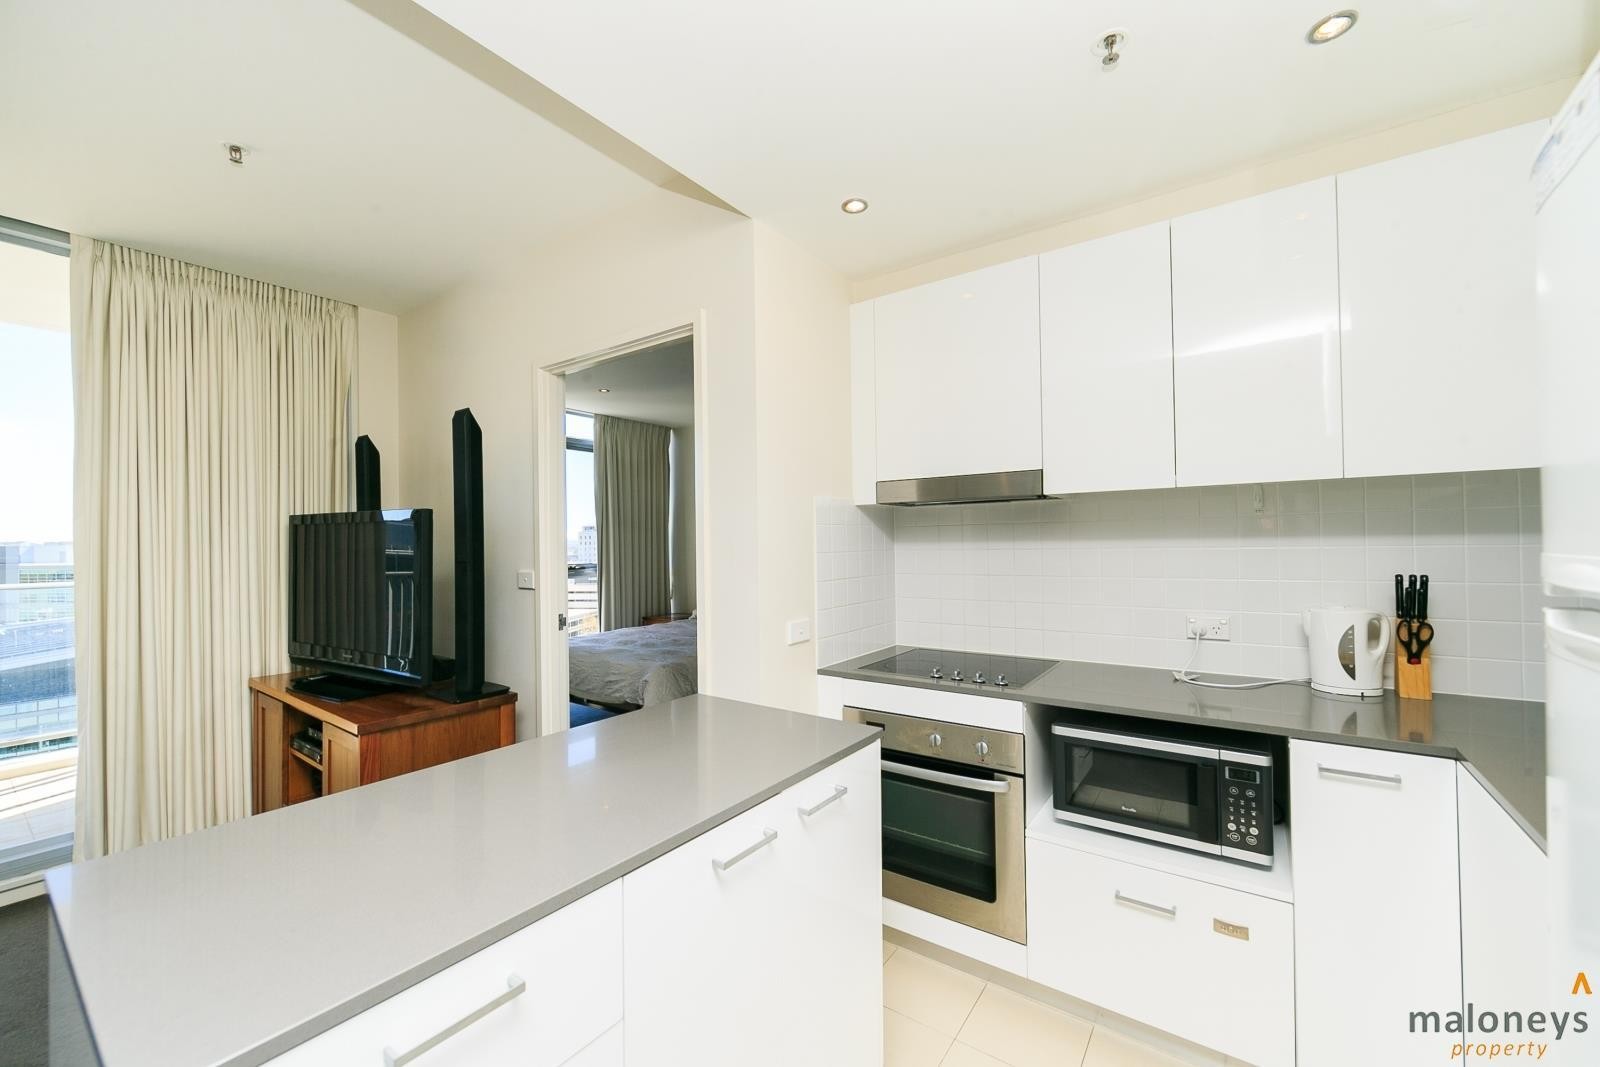 Best Value Affordable Furnished One Bedroom Apartment in the City - Metropolitan